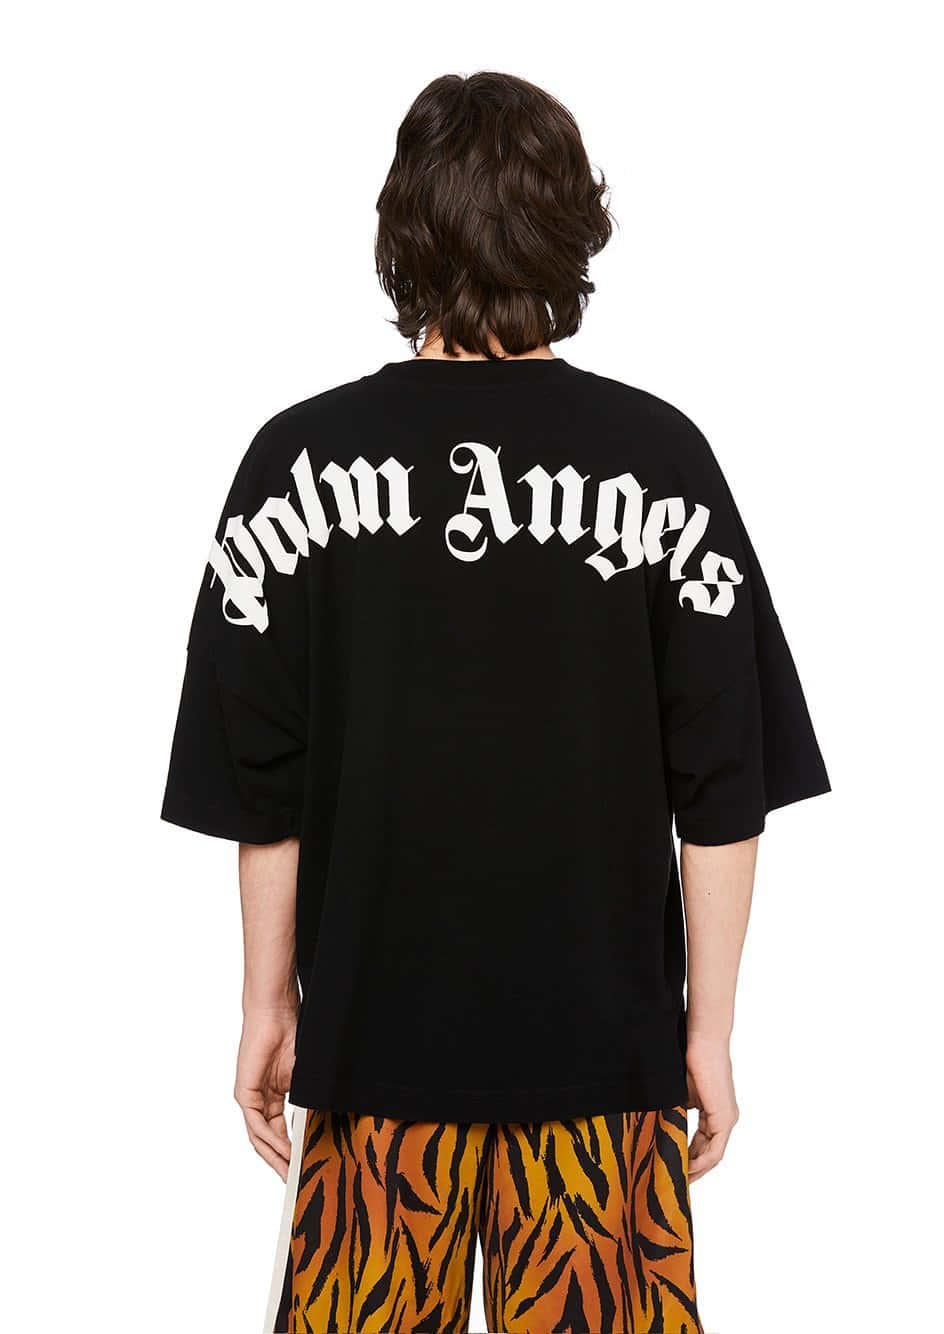 Stylish streetwear and modern luxury blend in Palm Angels' signature designs Wallpaper